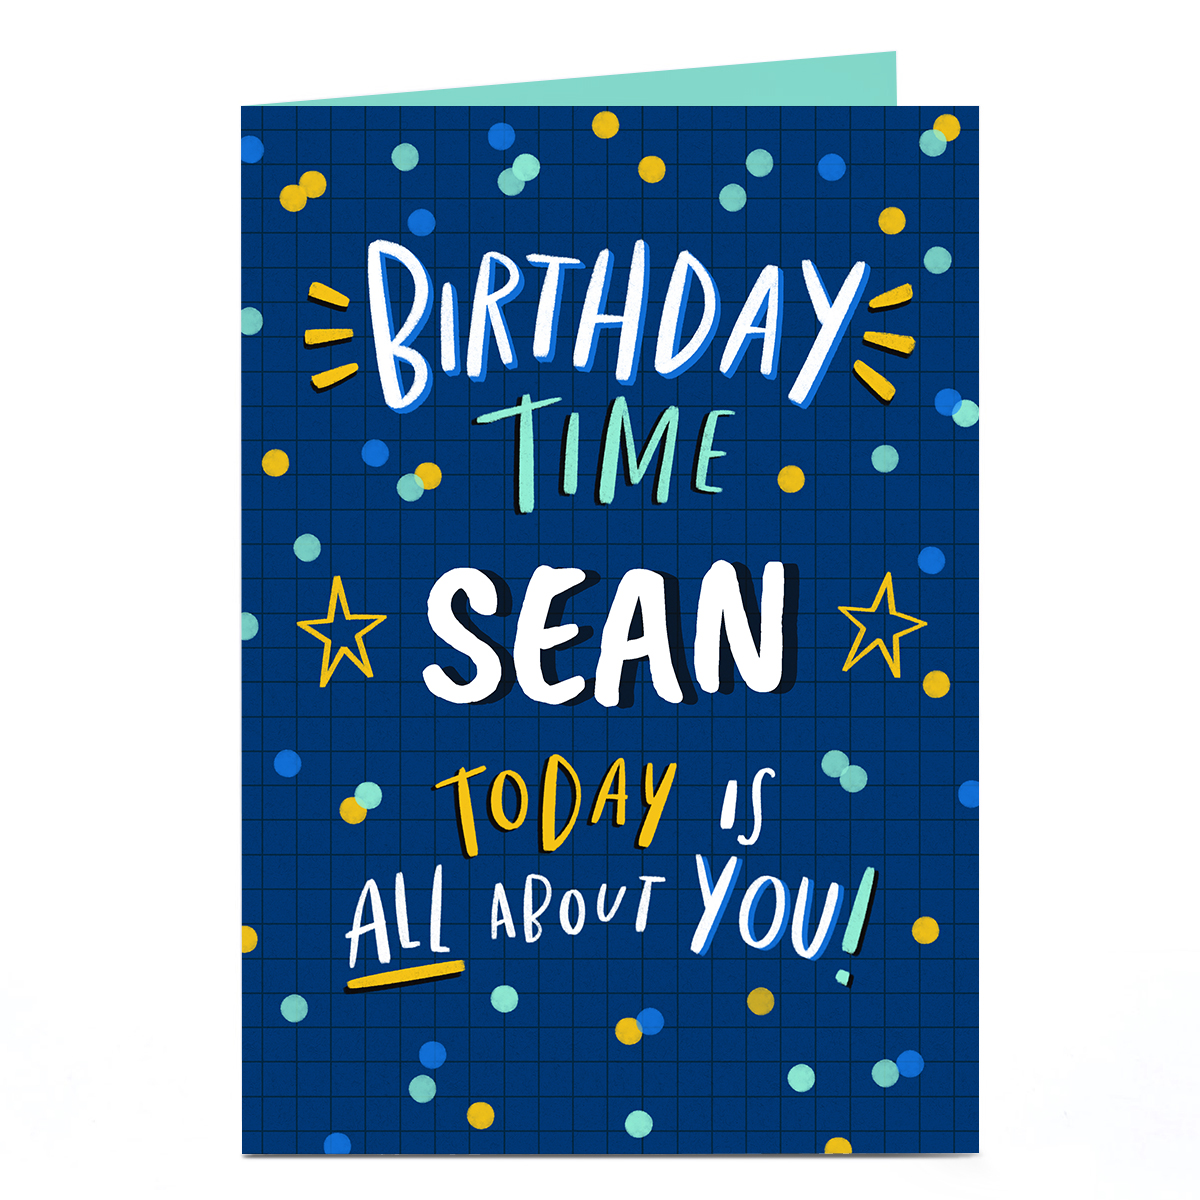 Personalised Birthday Card - All About You!